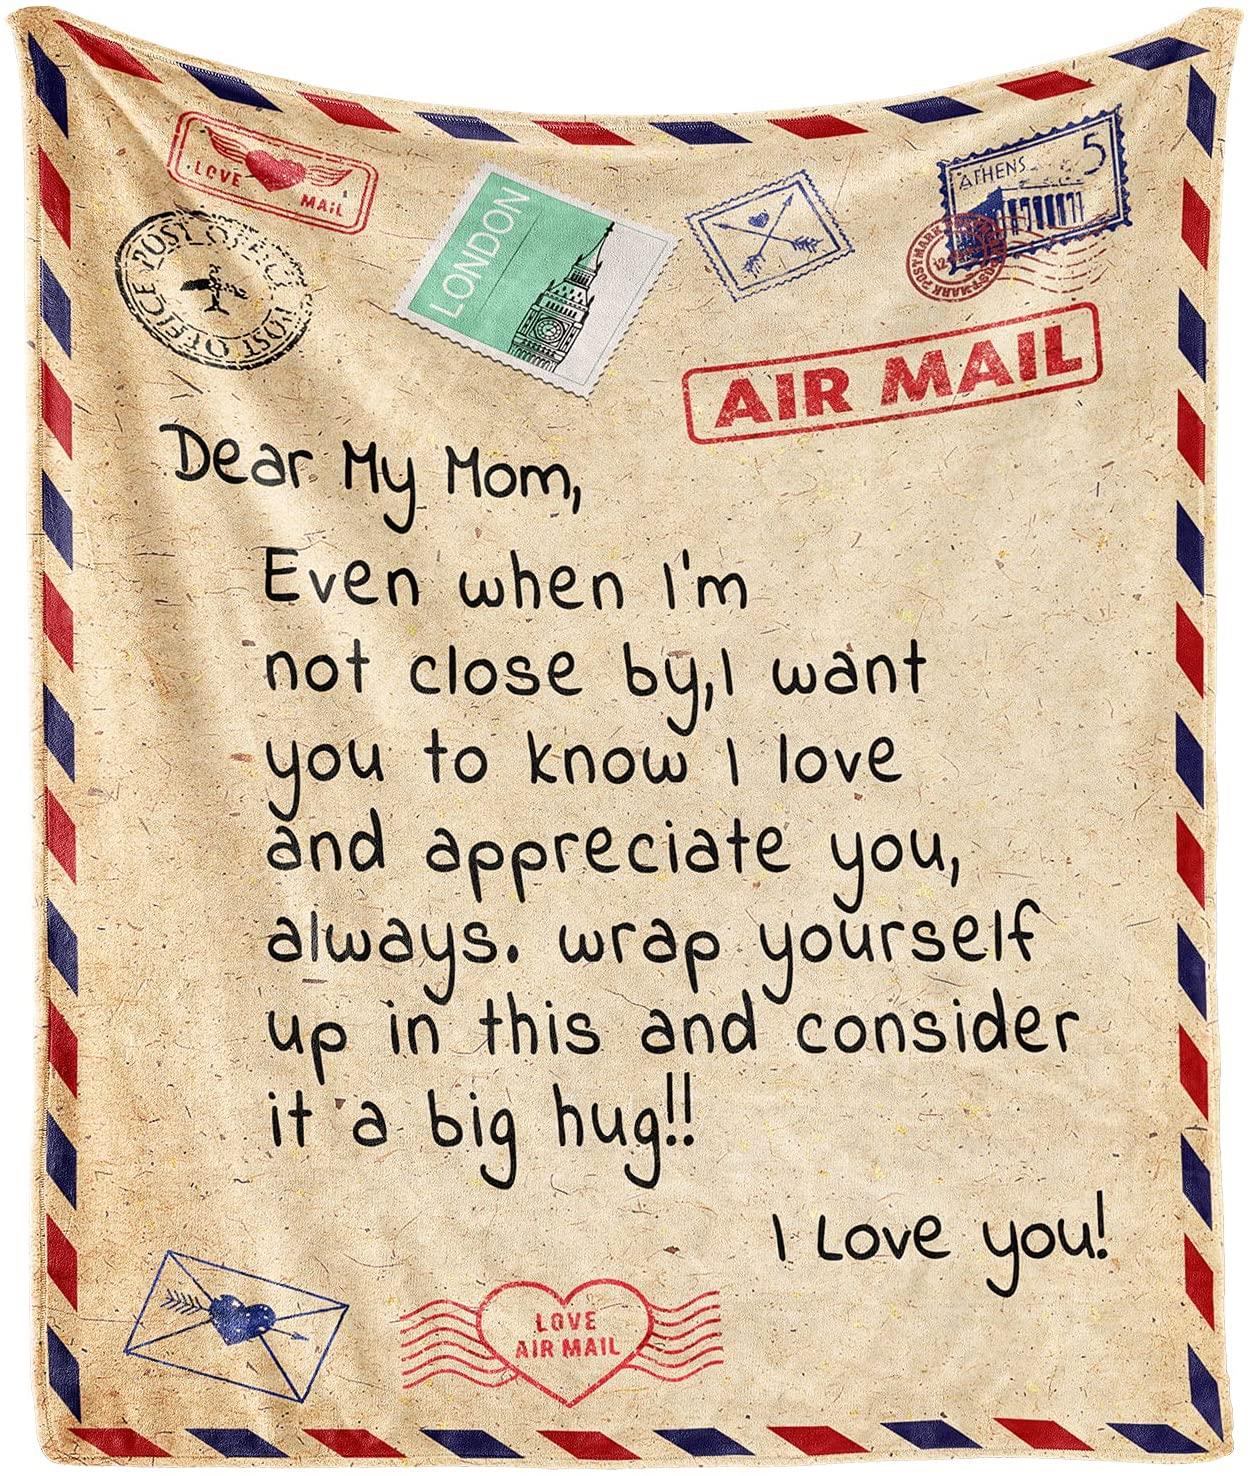 Best Gifts for Mom Gifts for Mom from Daughter Son Christmas Mothers Day to My Mom Blanket Gift Love Letter